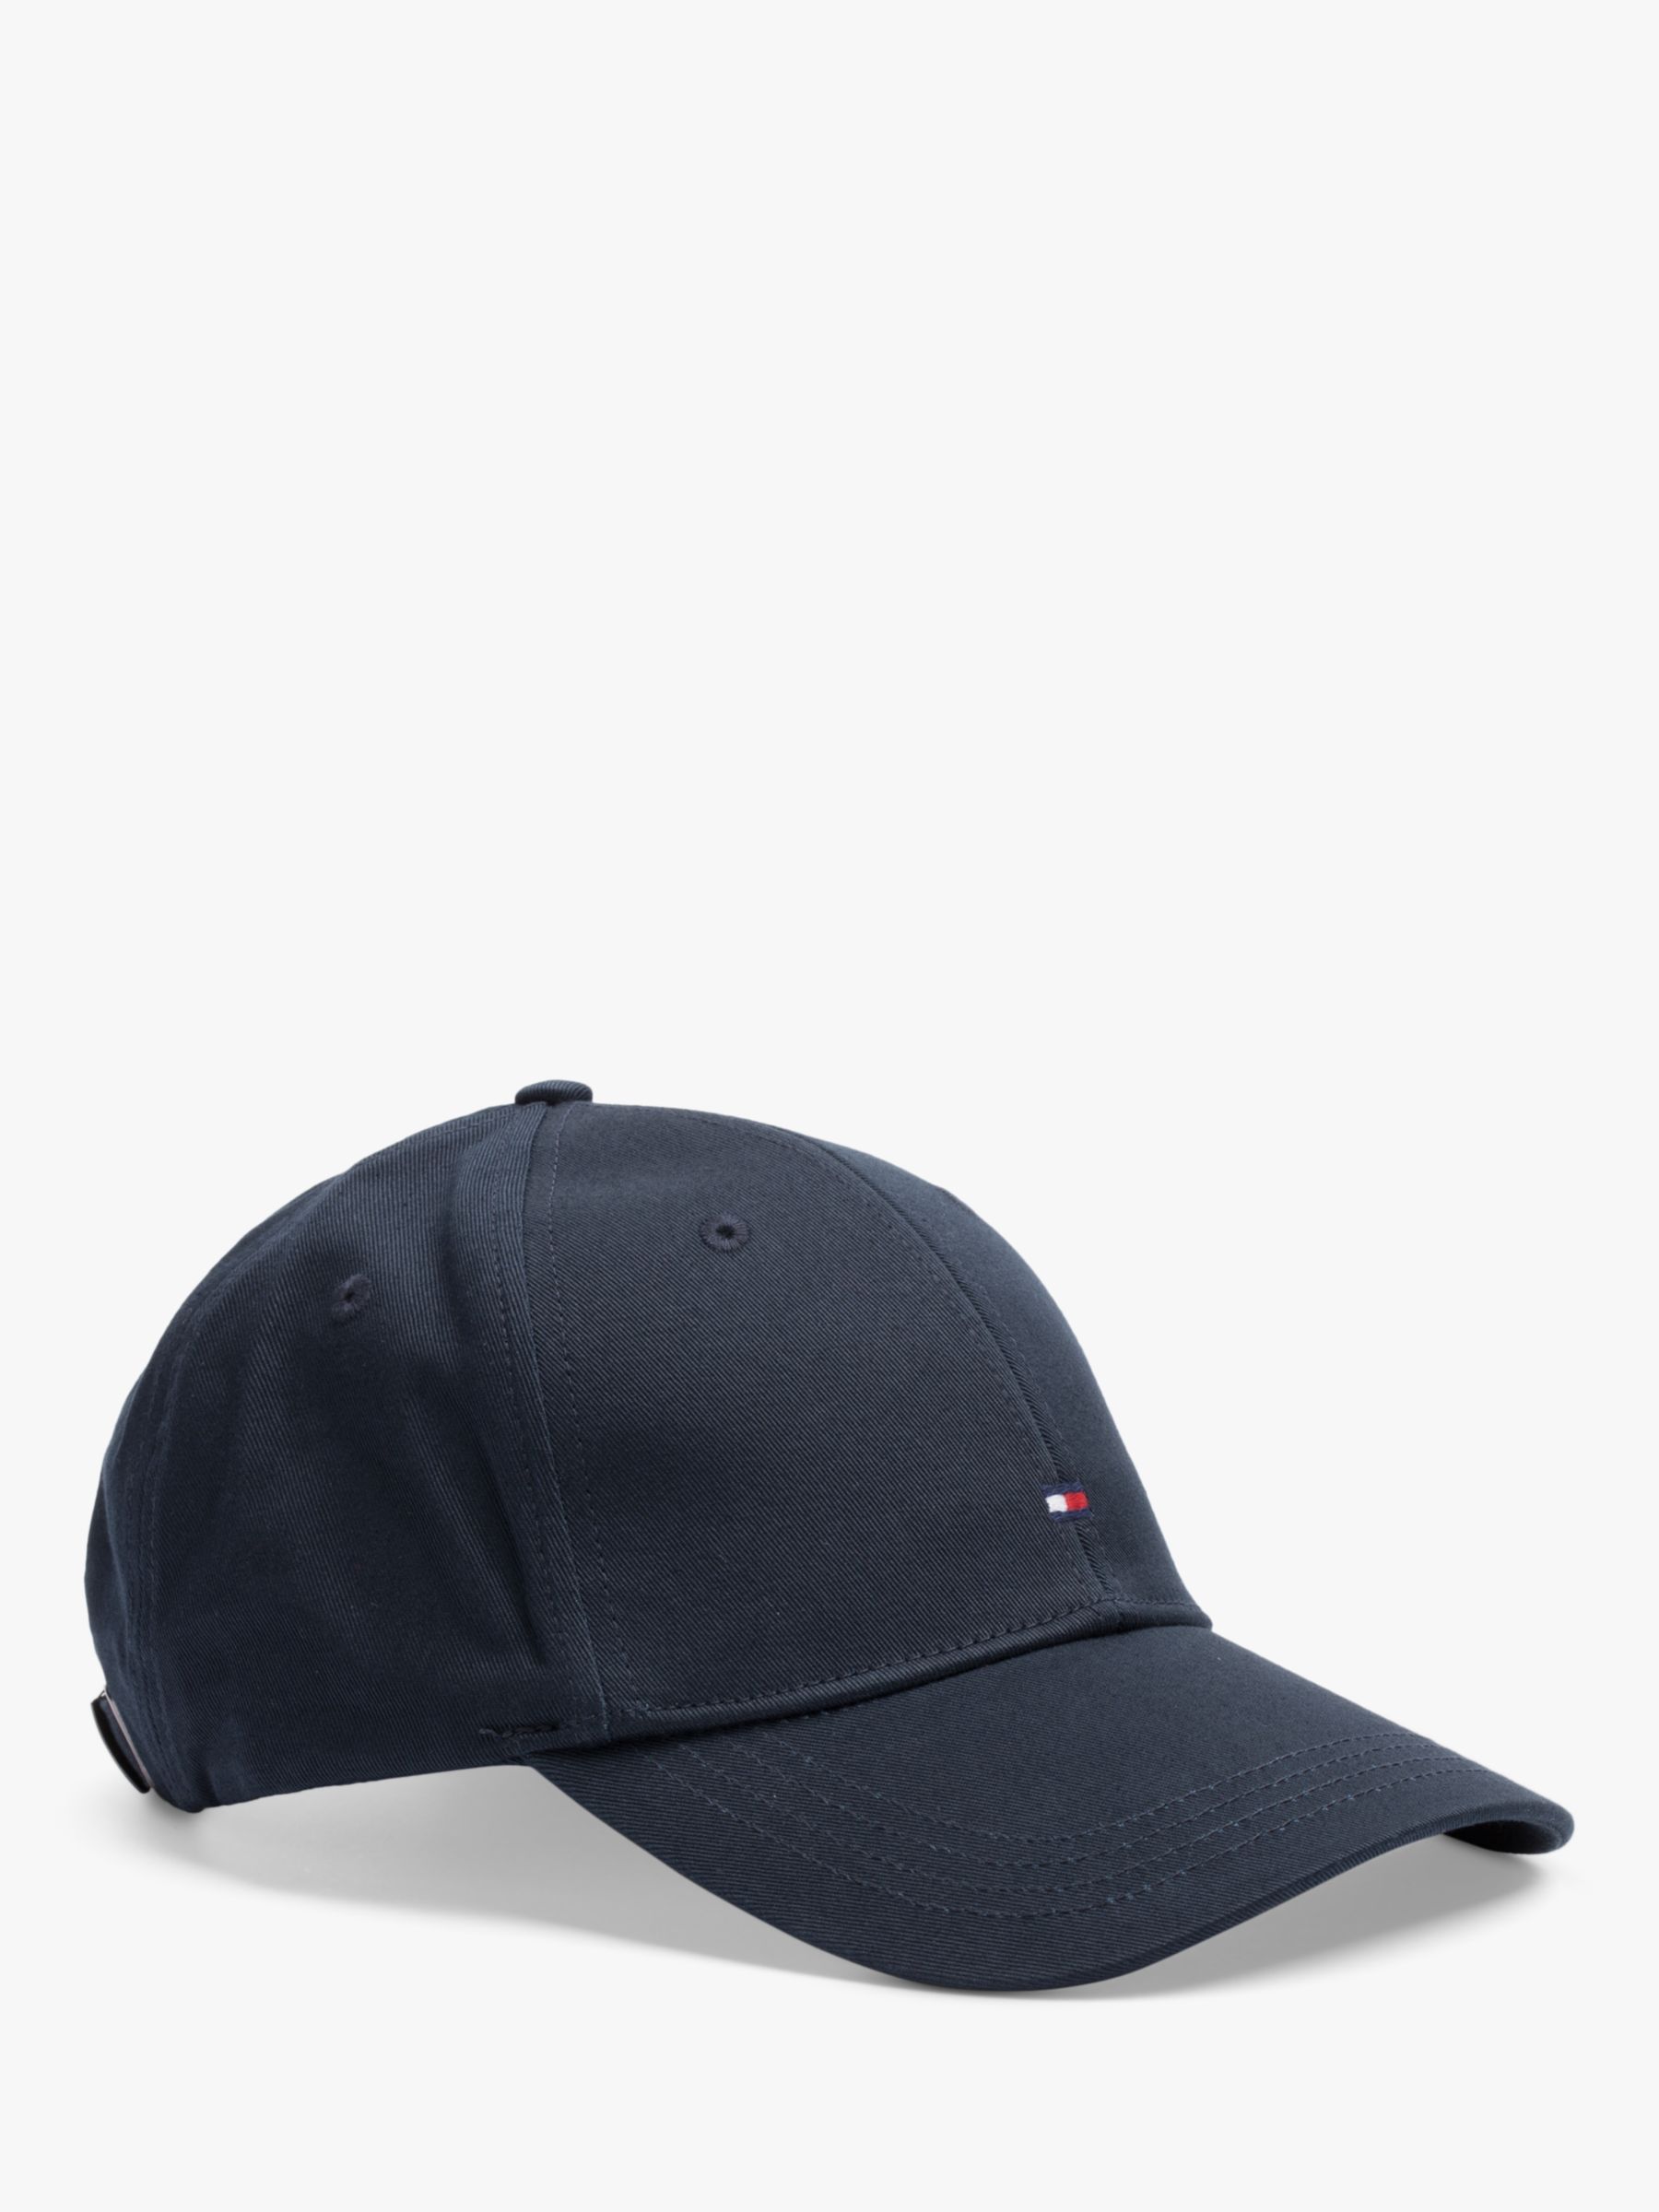 Tommy Hilfiger Classic Baseball Cap, One Size, Midnight at John Lewis & Partners